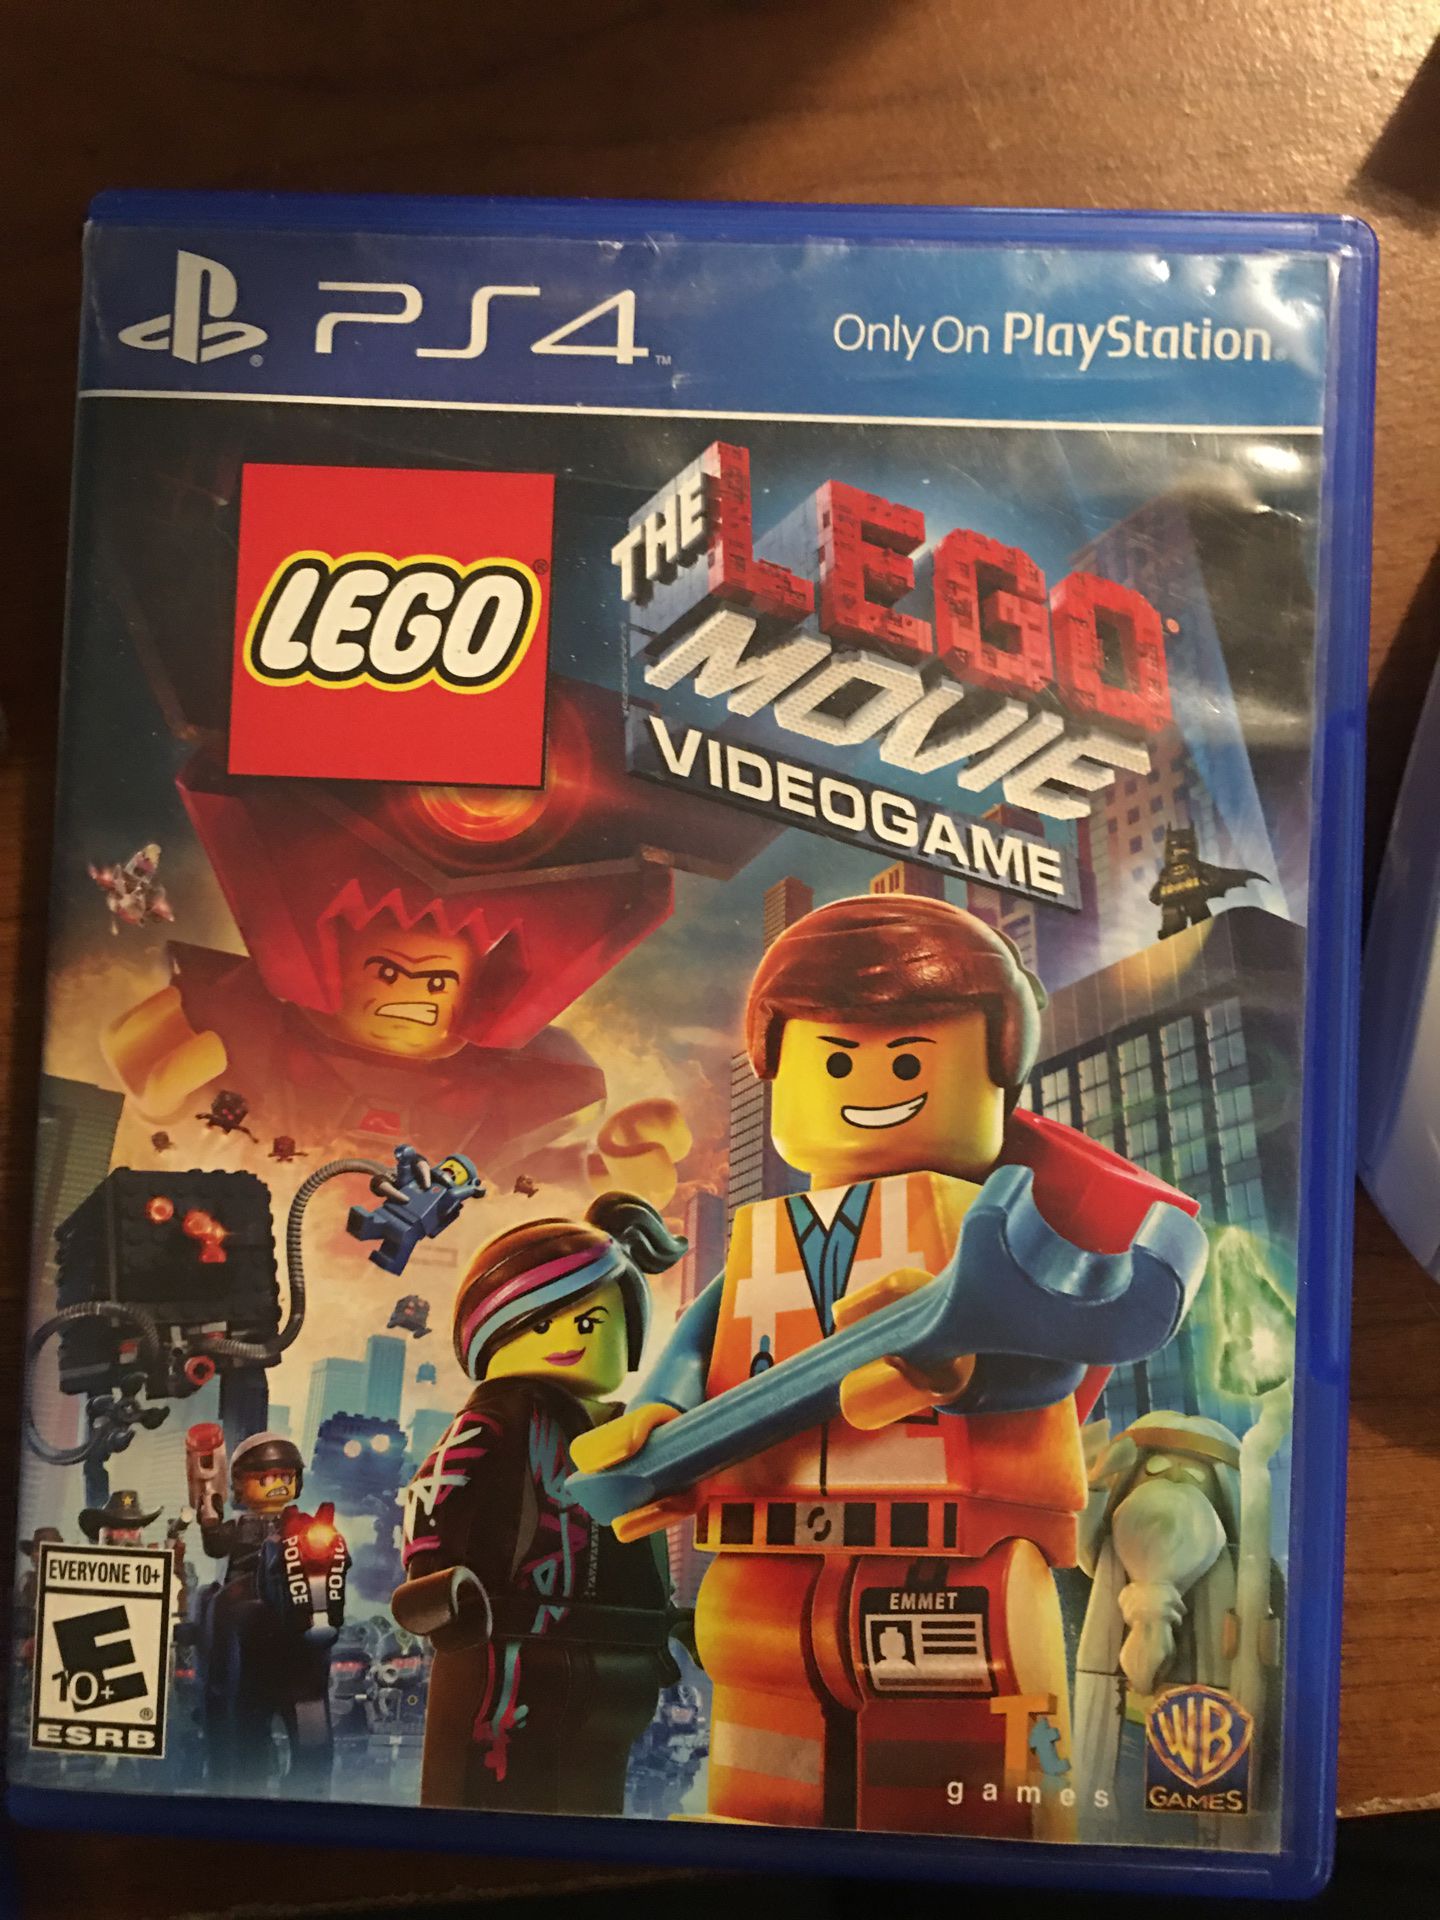 The LEGO Movie game for PS4